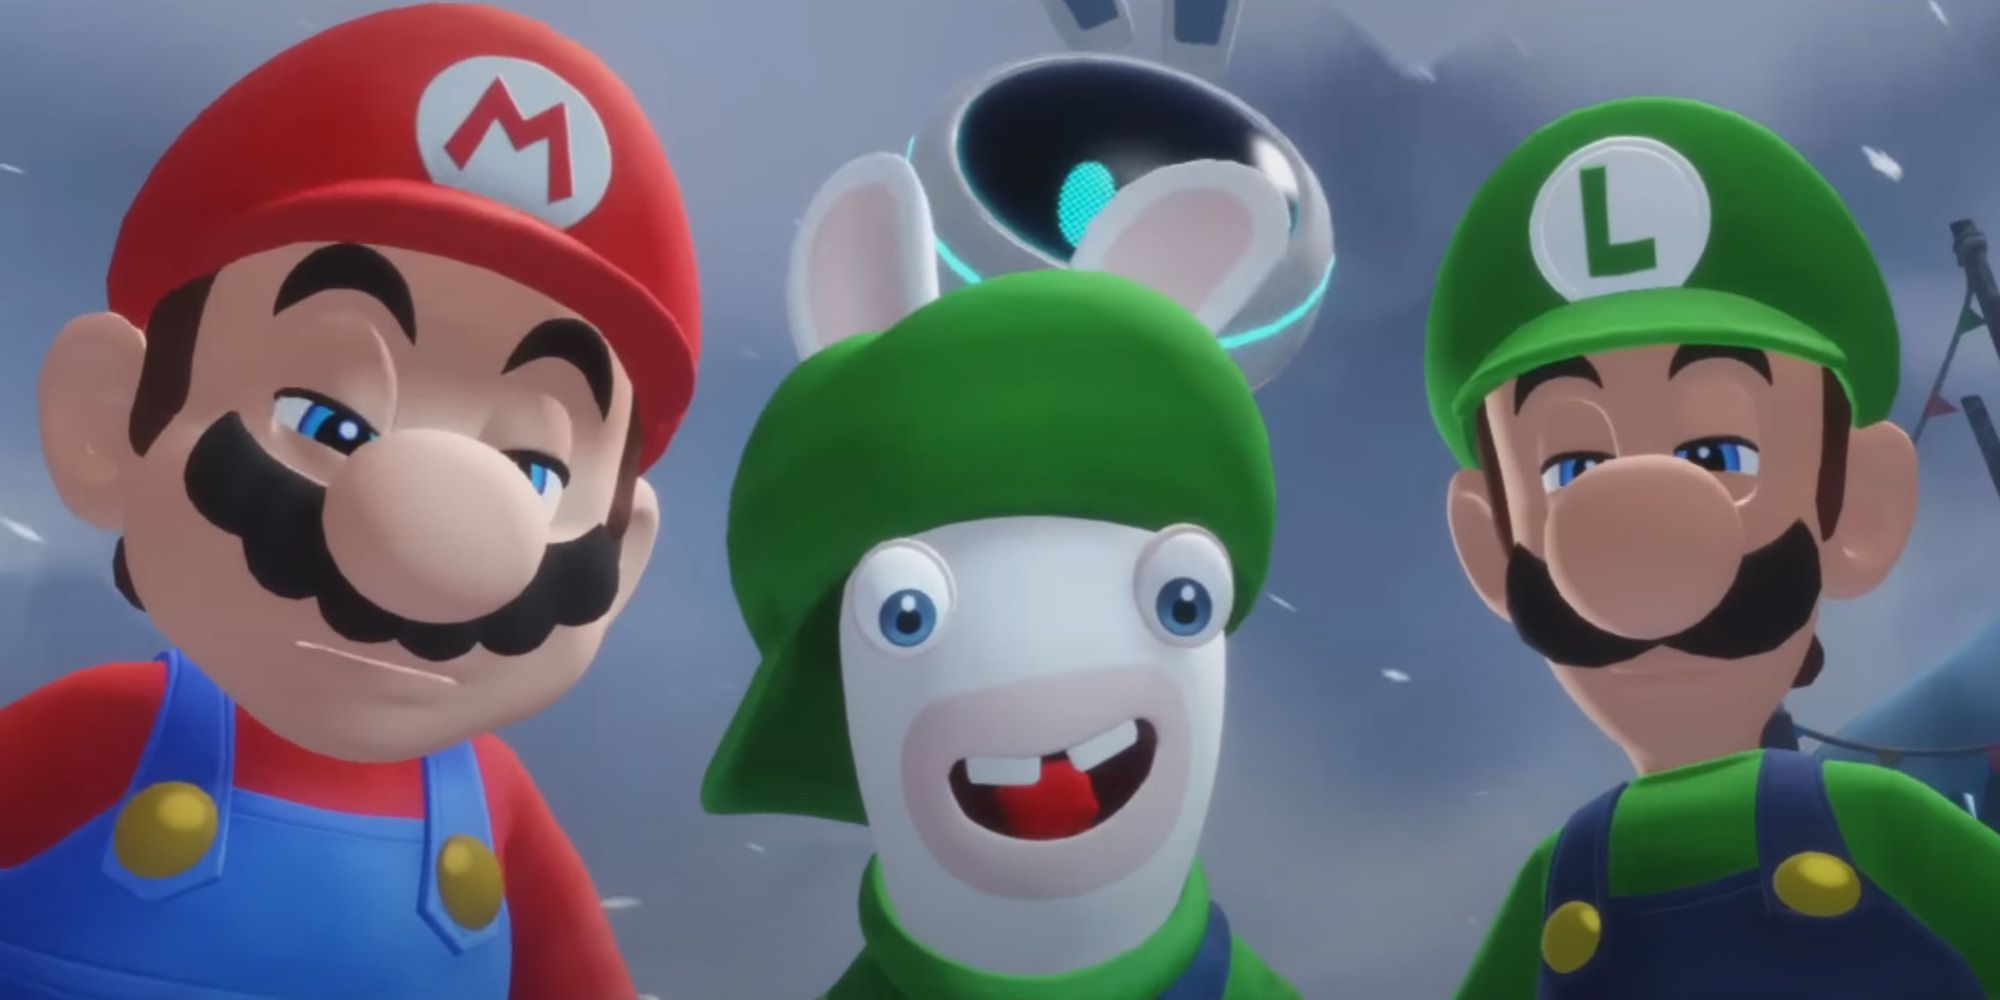 Mario + Rabbids' may look cute, but it's viciously difficult